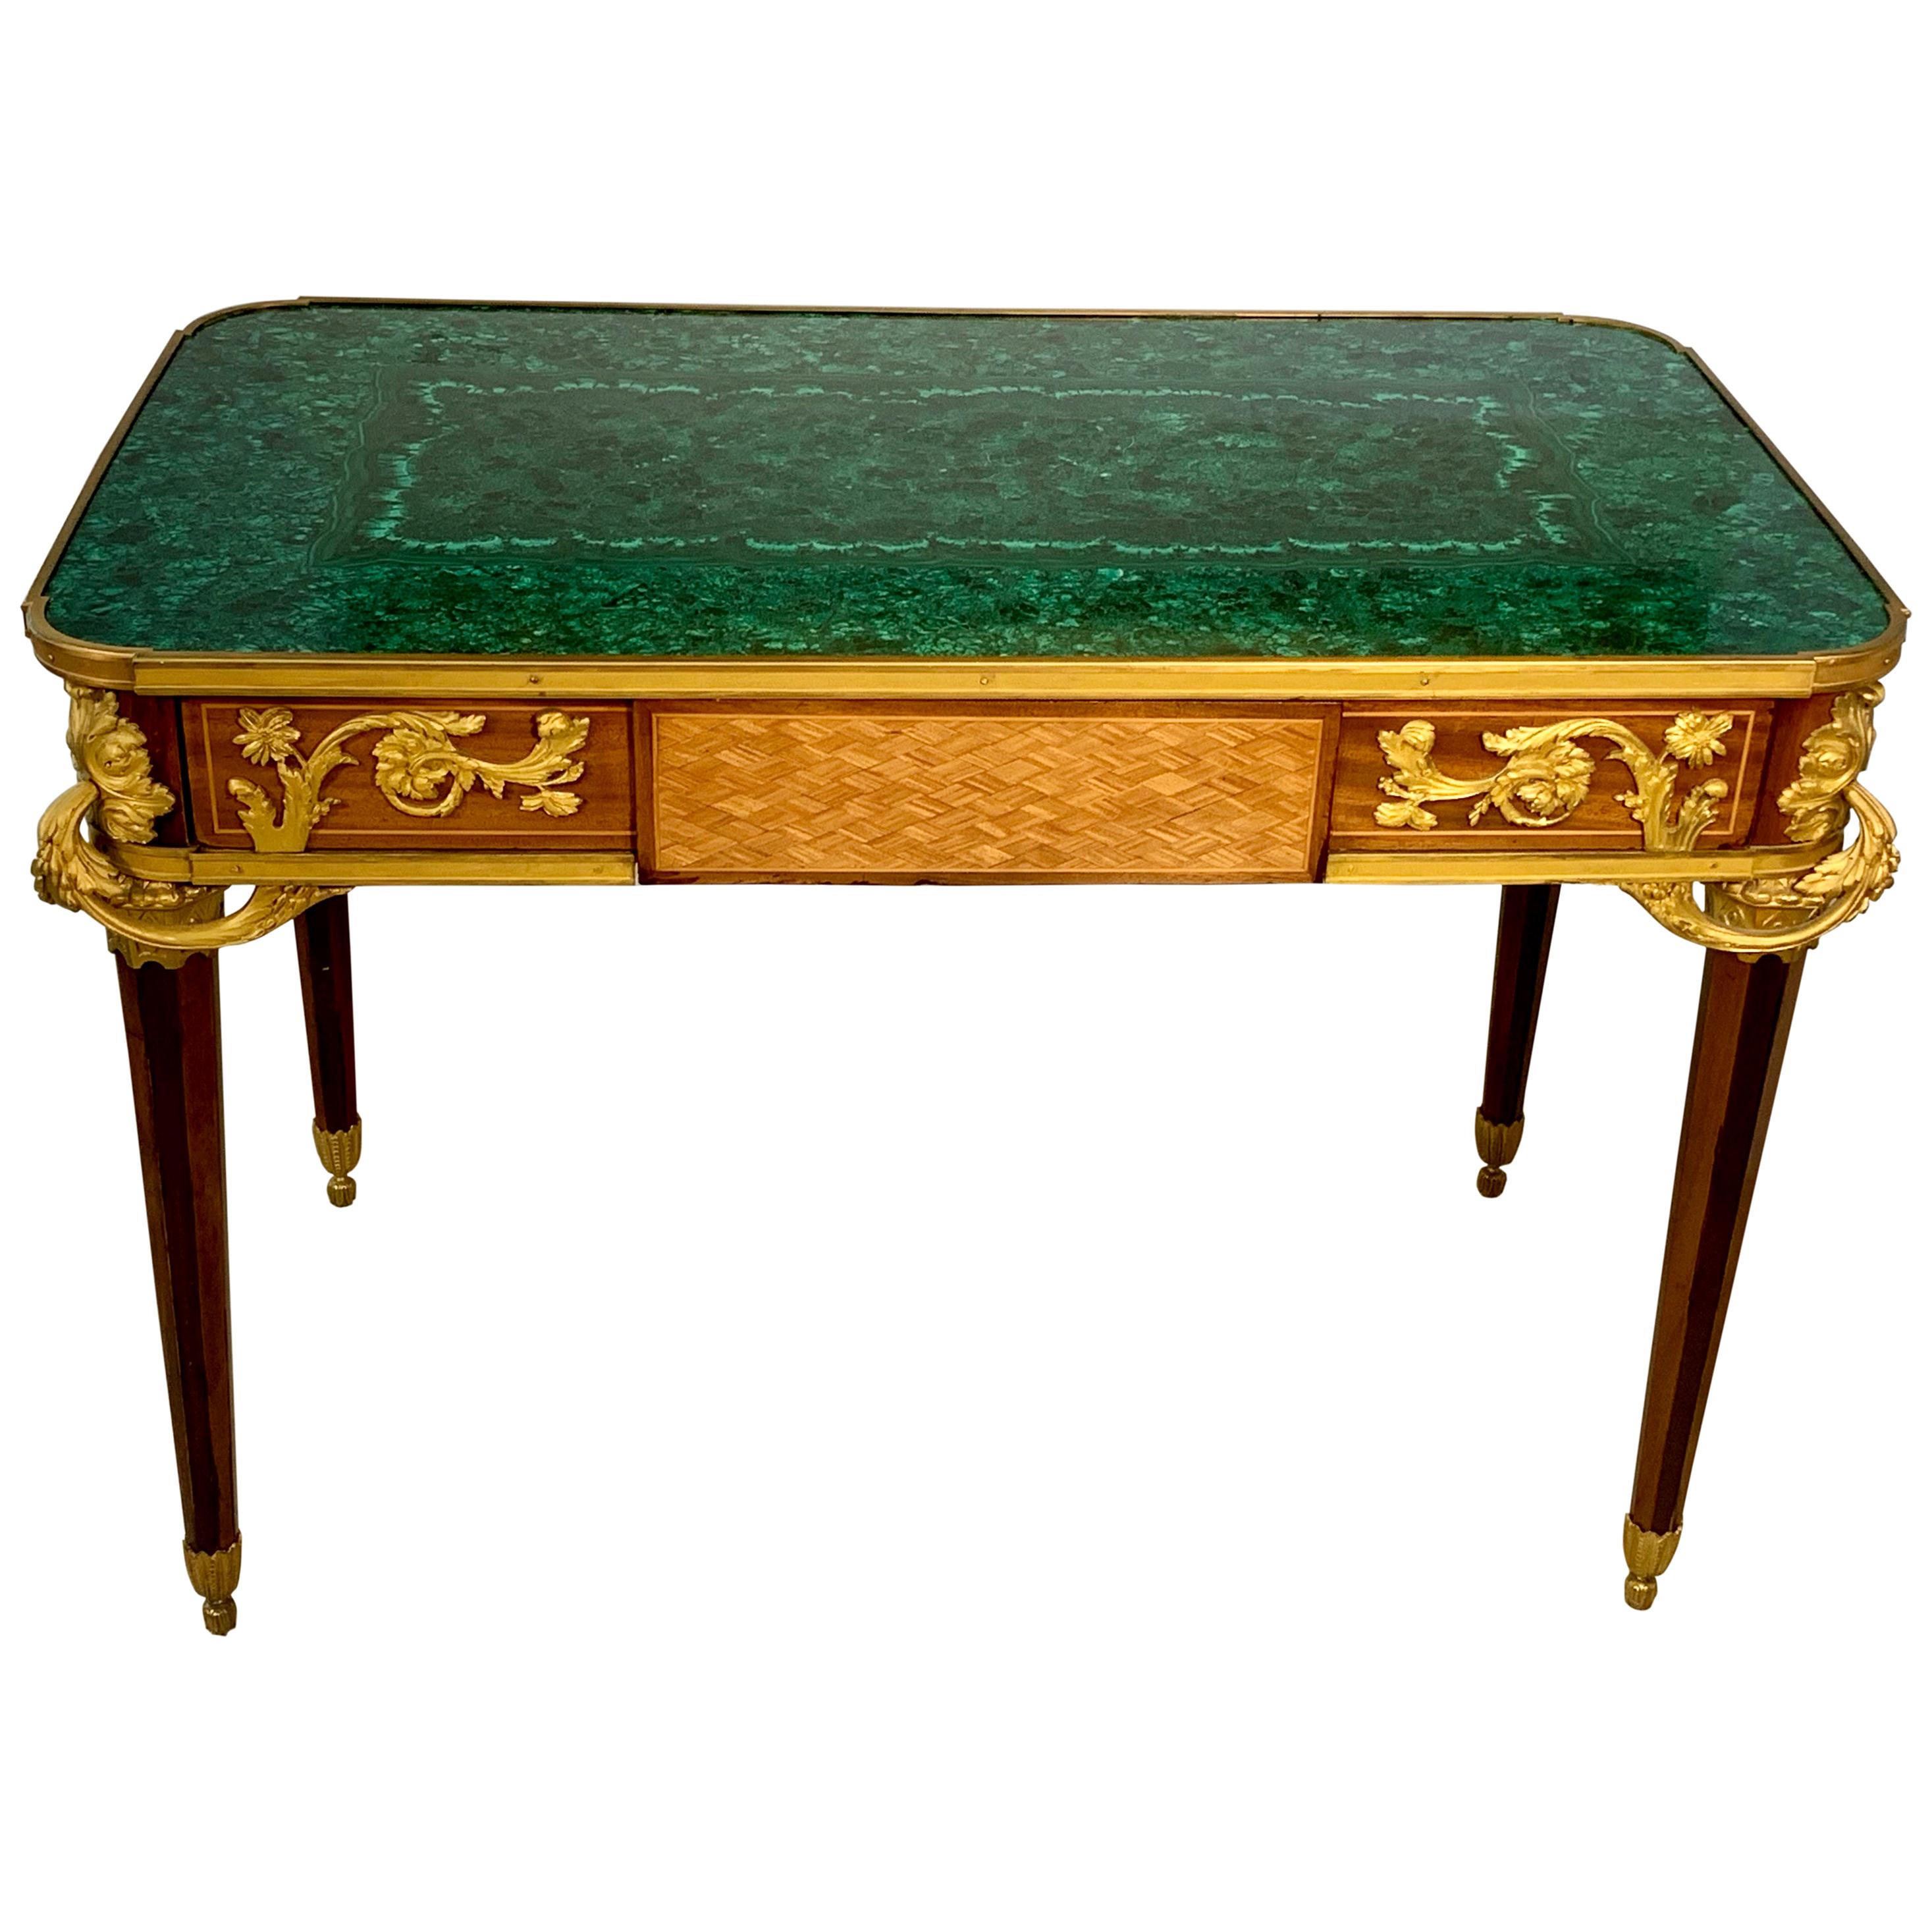 Antique French Ormolu Mounted Malachite Top Center Table / desk For Sale